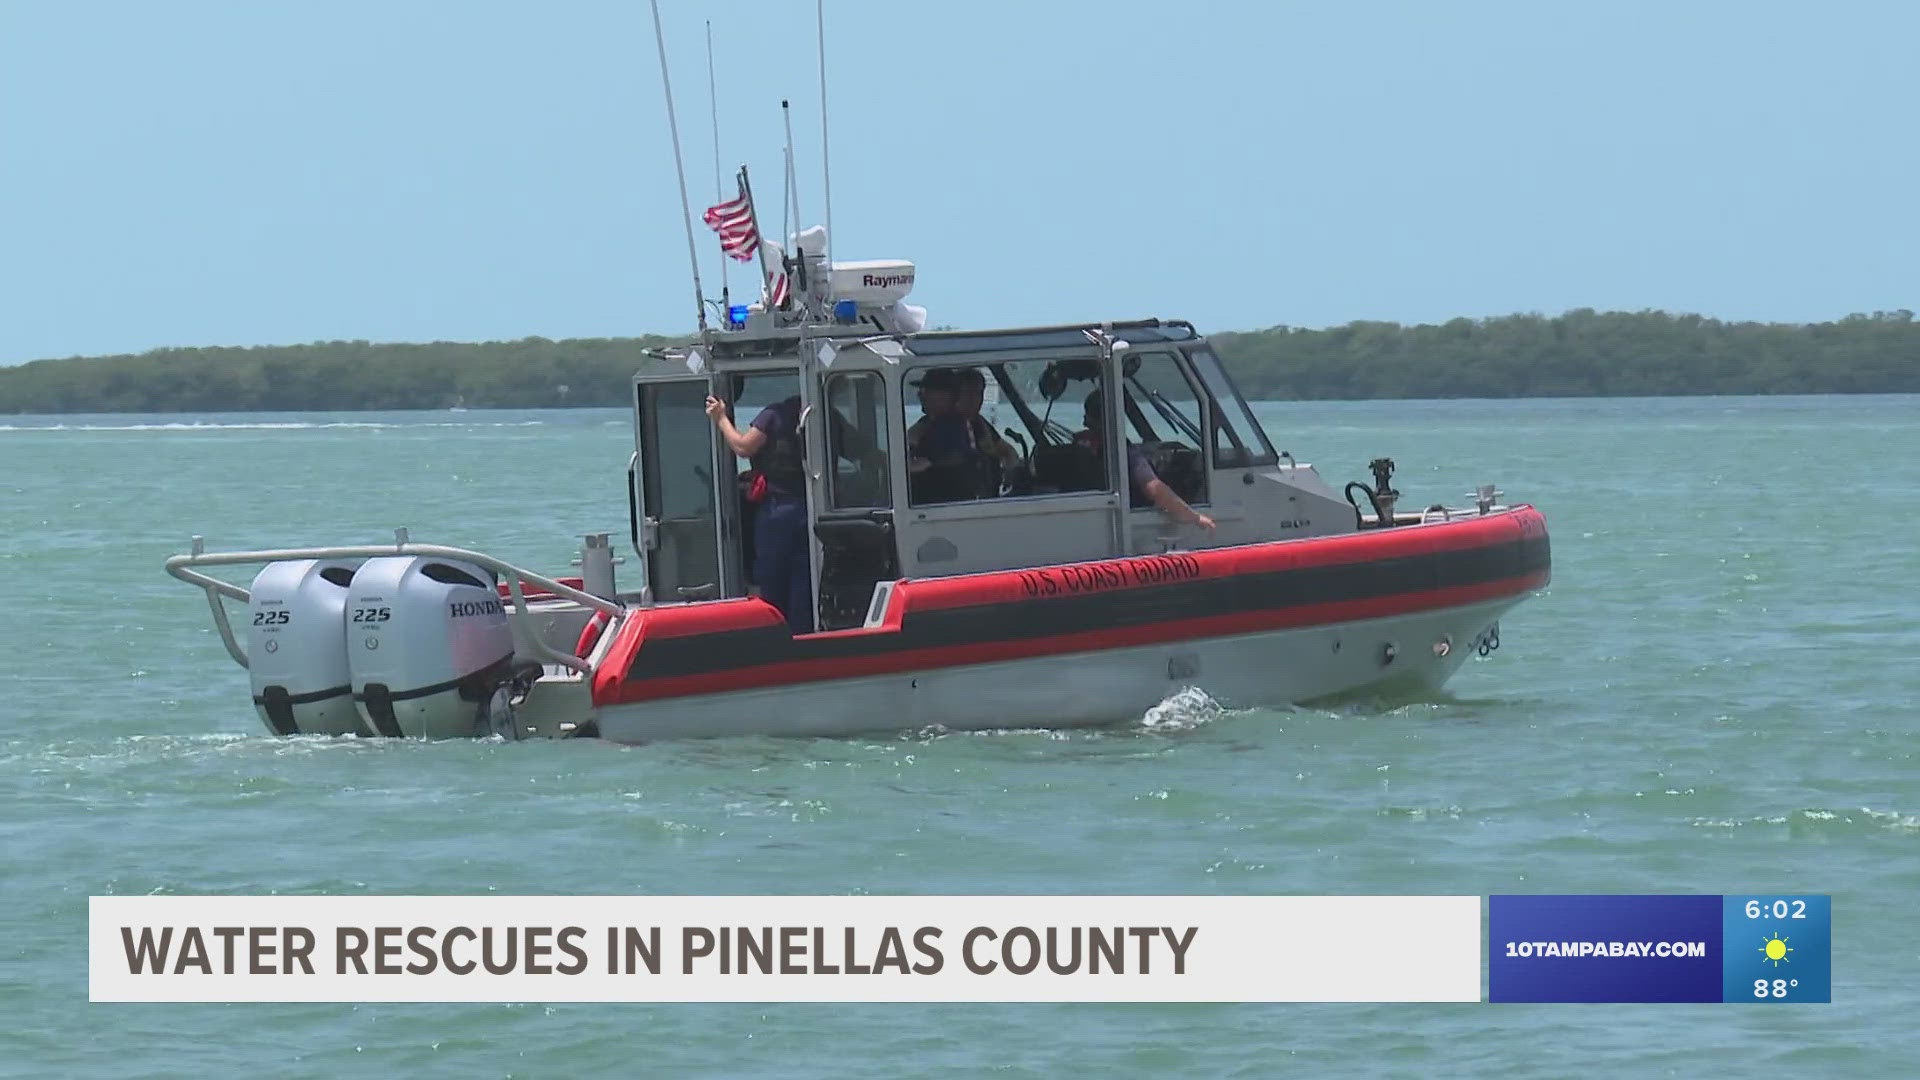 Coast Guard crews responded to two separate calls in Tampa Bay waters Saturday.